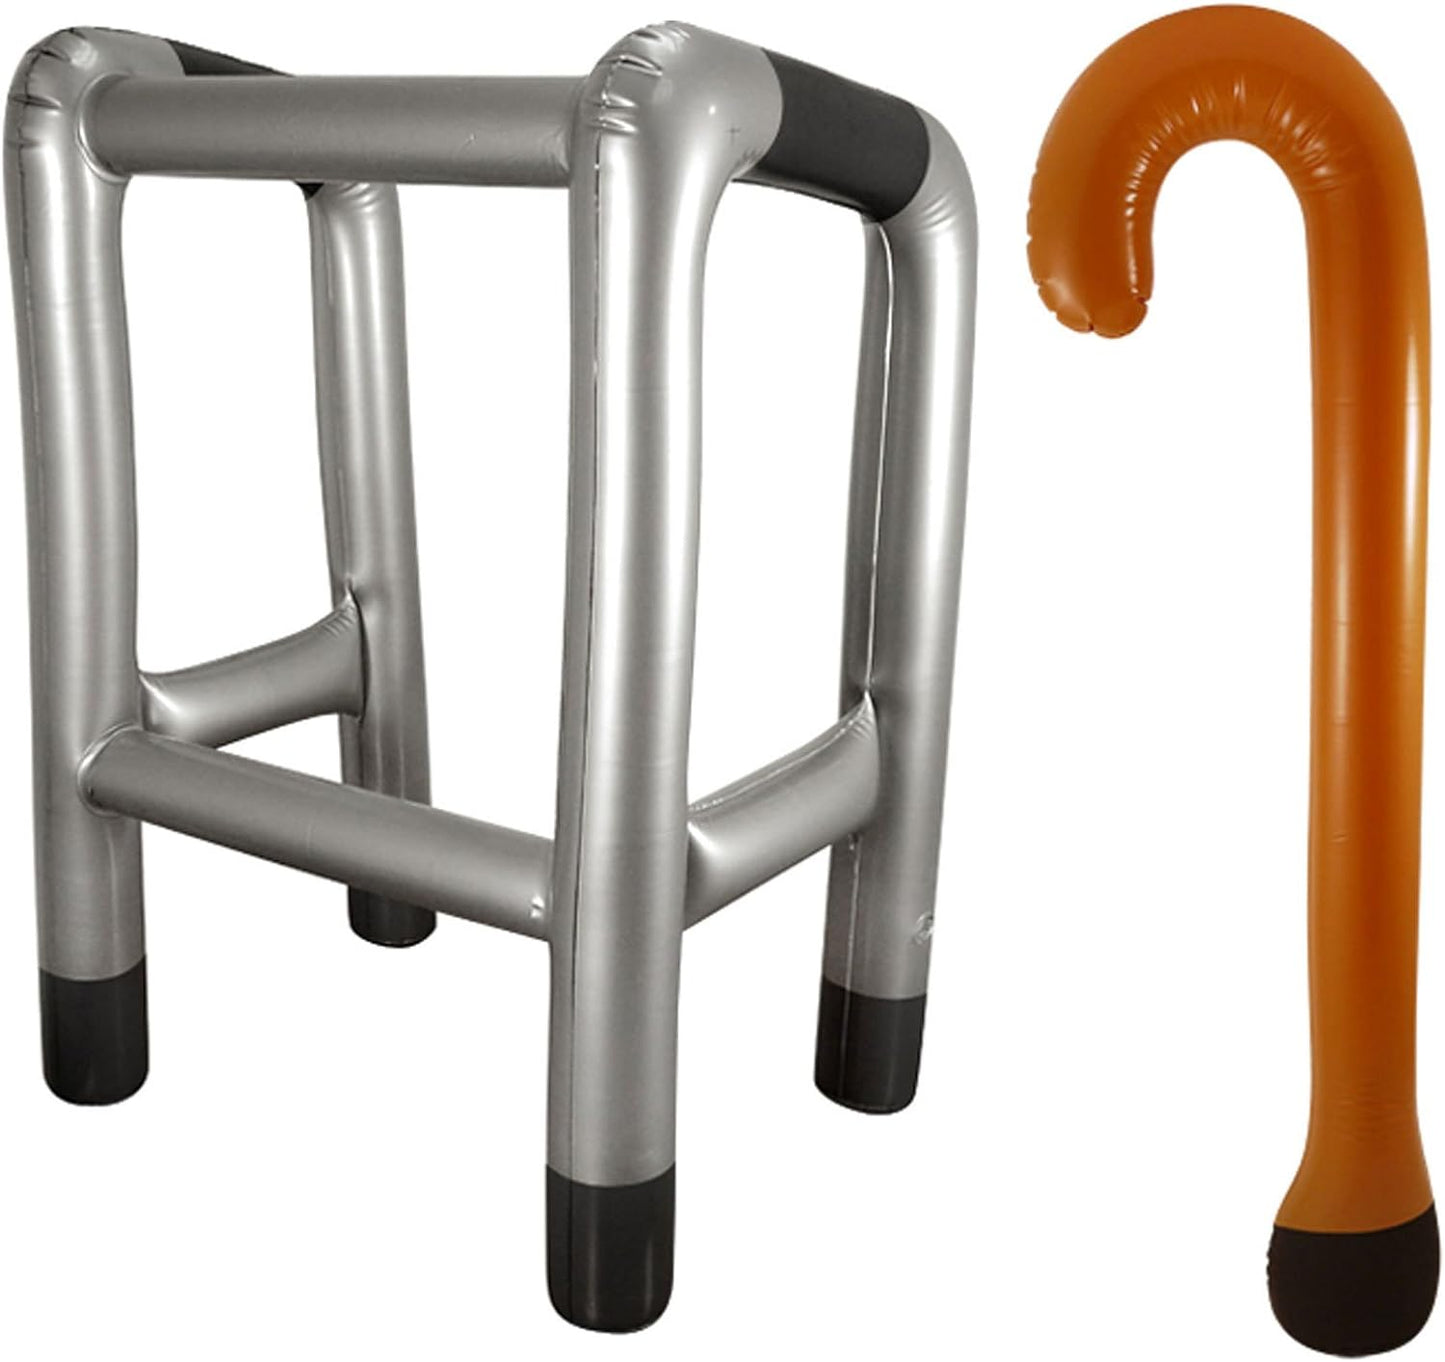 Inflatable Zimmer or Walking Frame Fancy Dress Parties, Photo Prop,